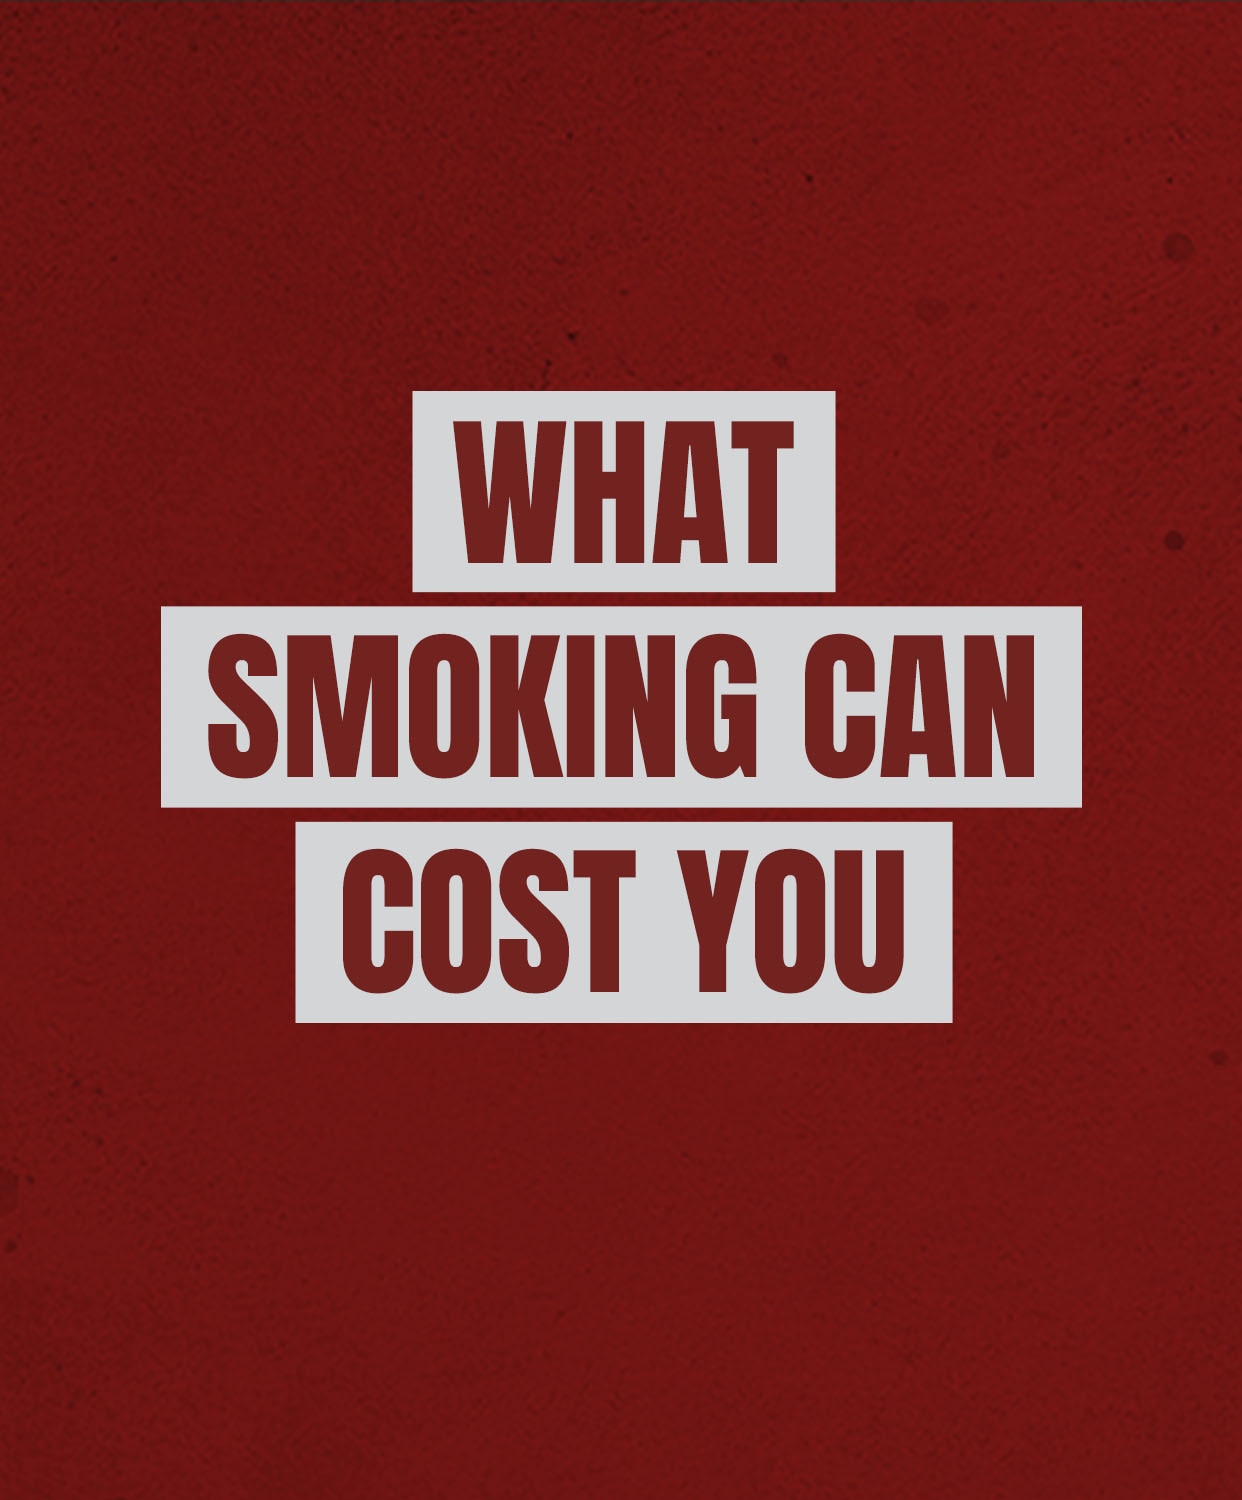 what smoking can cost you